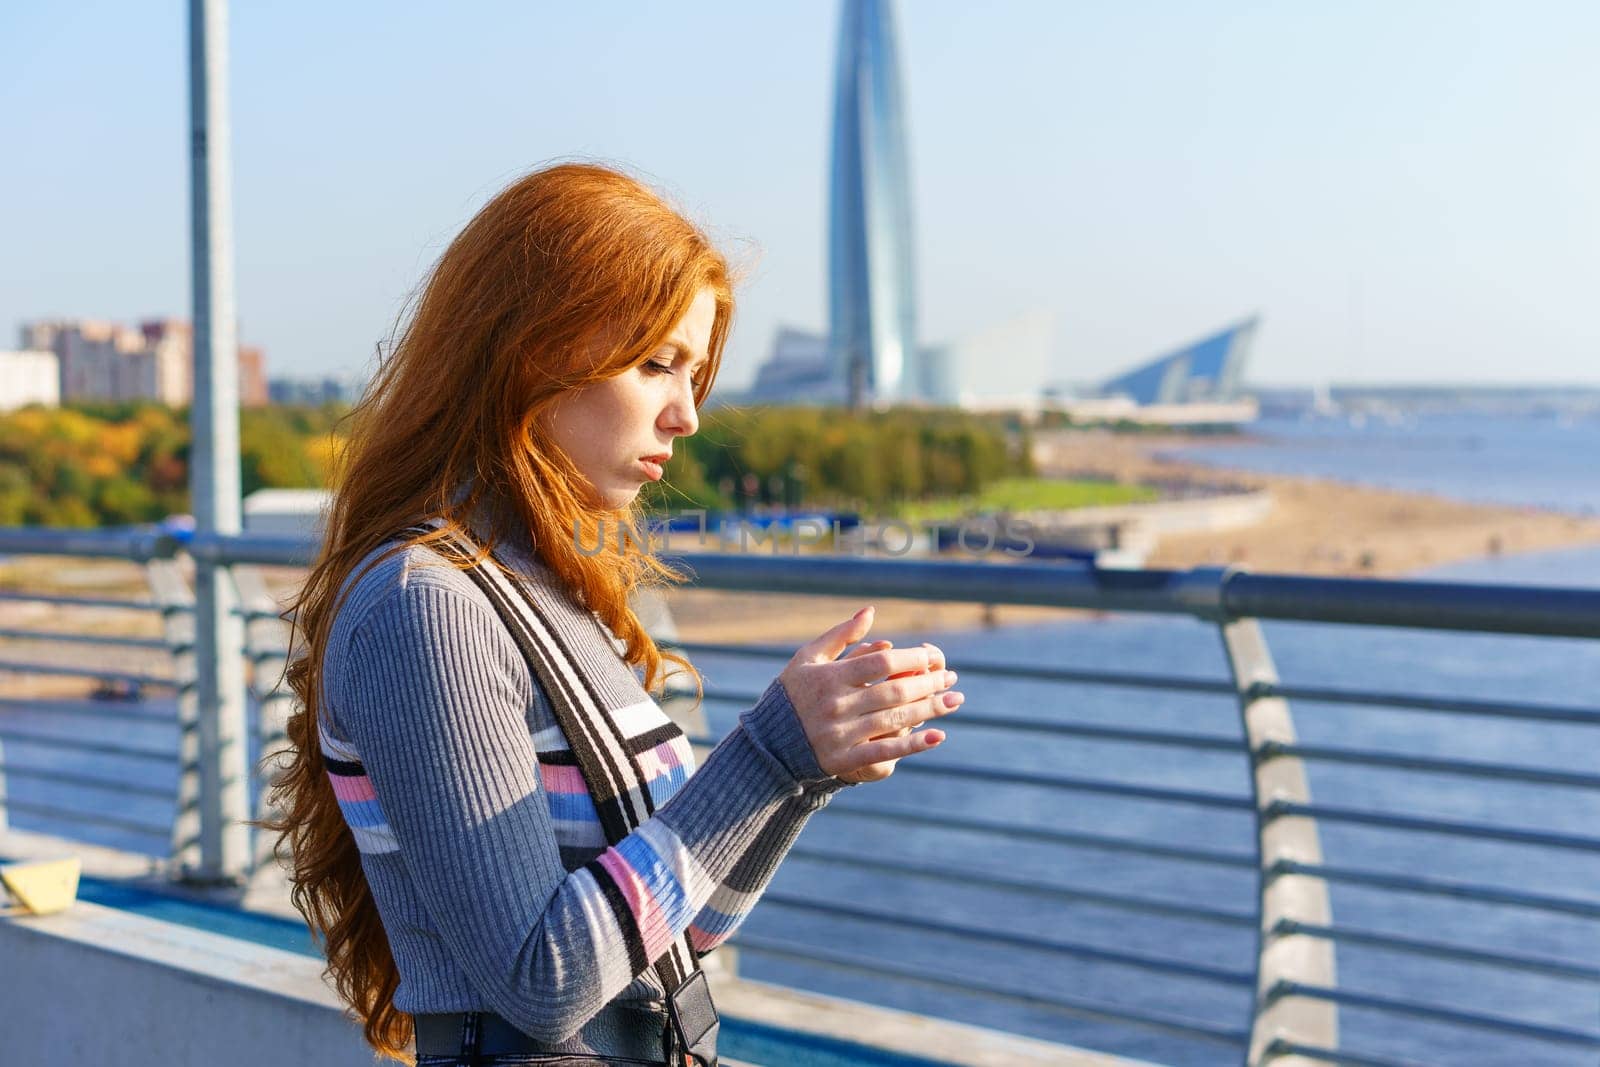 Young red-haired woman with phone in her hand stands on bridge overlooking city by EkaterinaPereslavtseva